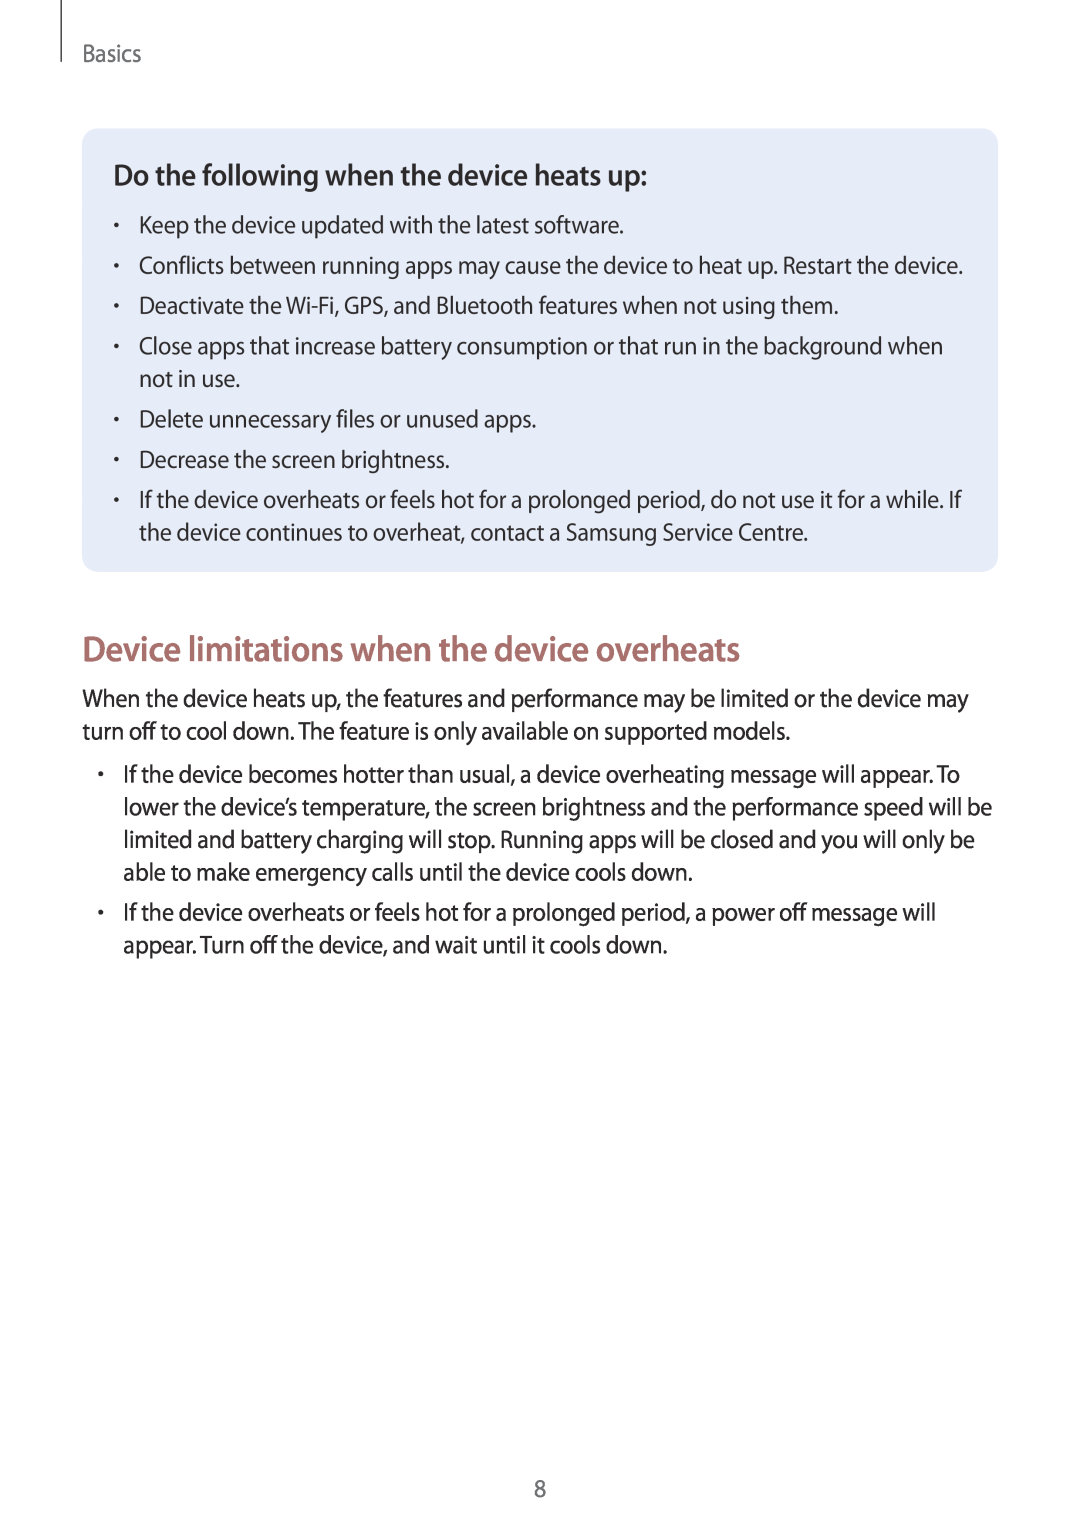 Samsung SM-A520FZBAXEF Device limitations when the device overheats, Do the following when the device heats up, Basics 